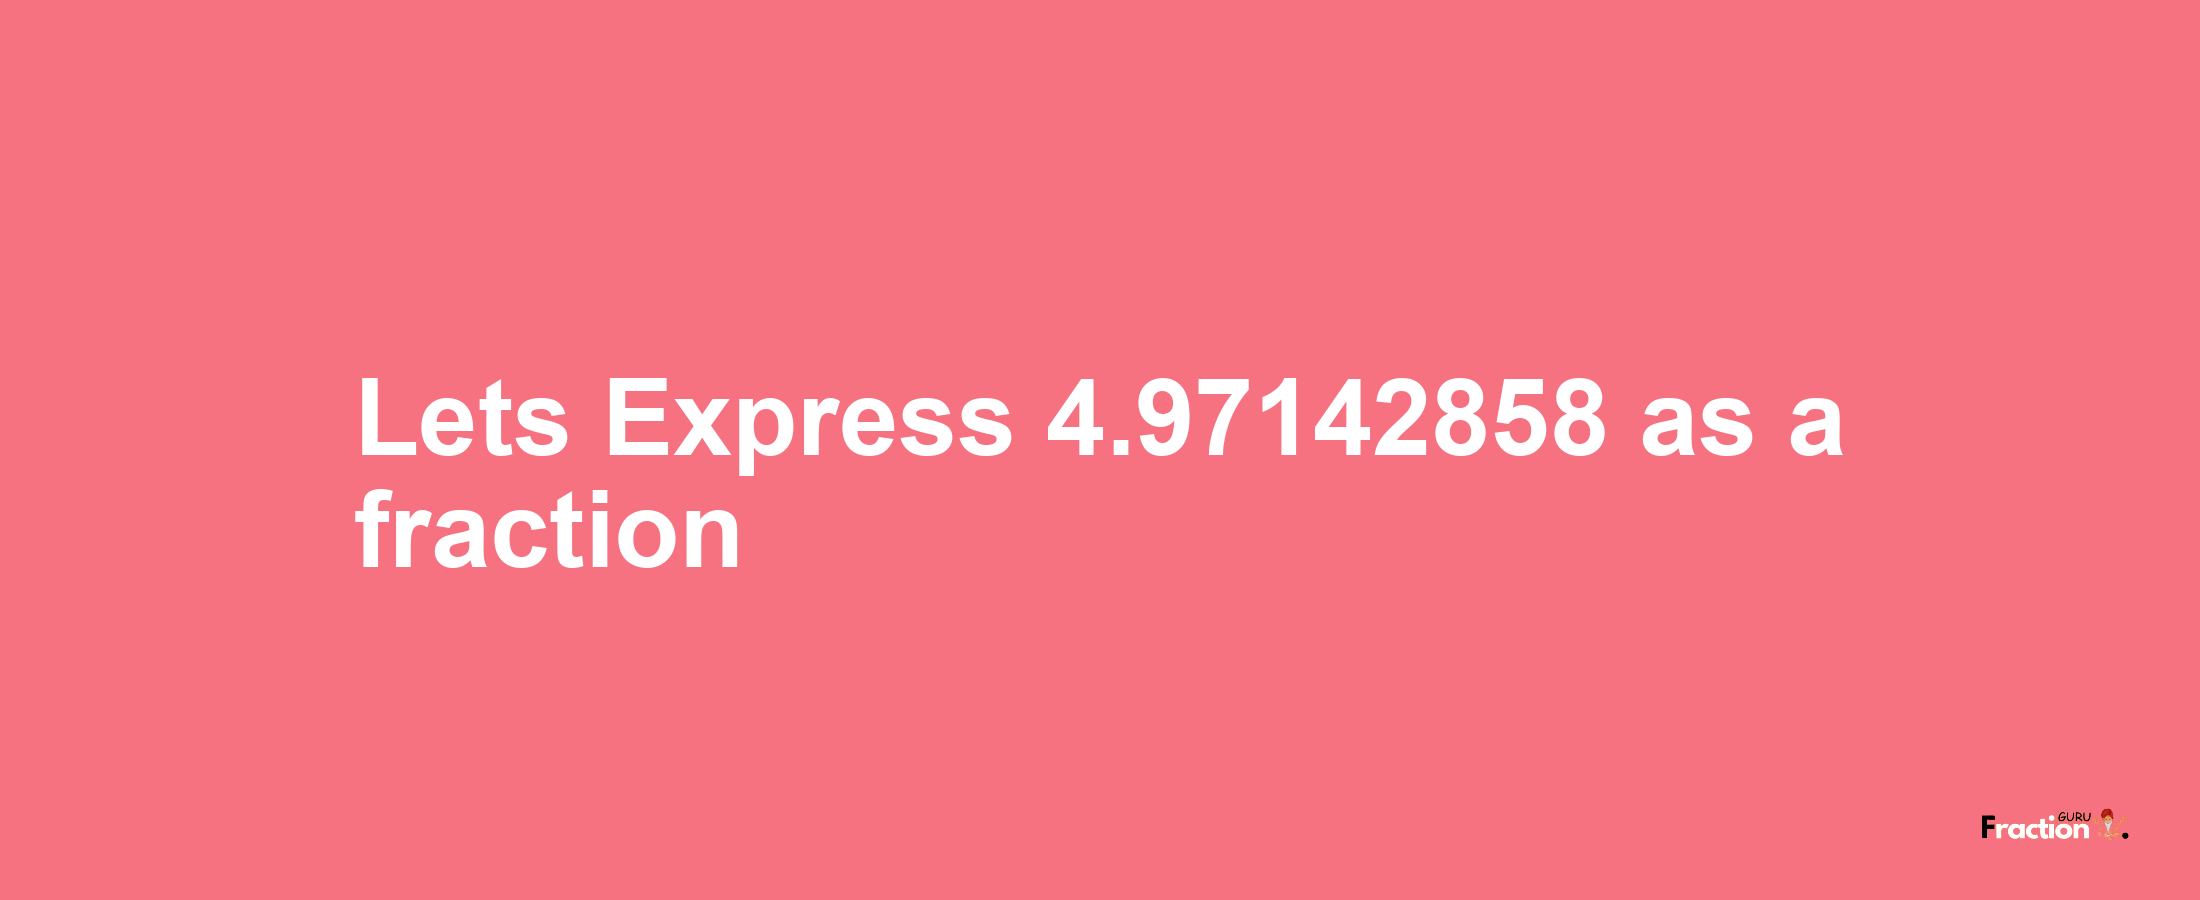 Lets Express 4.97142858 as afraction